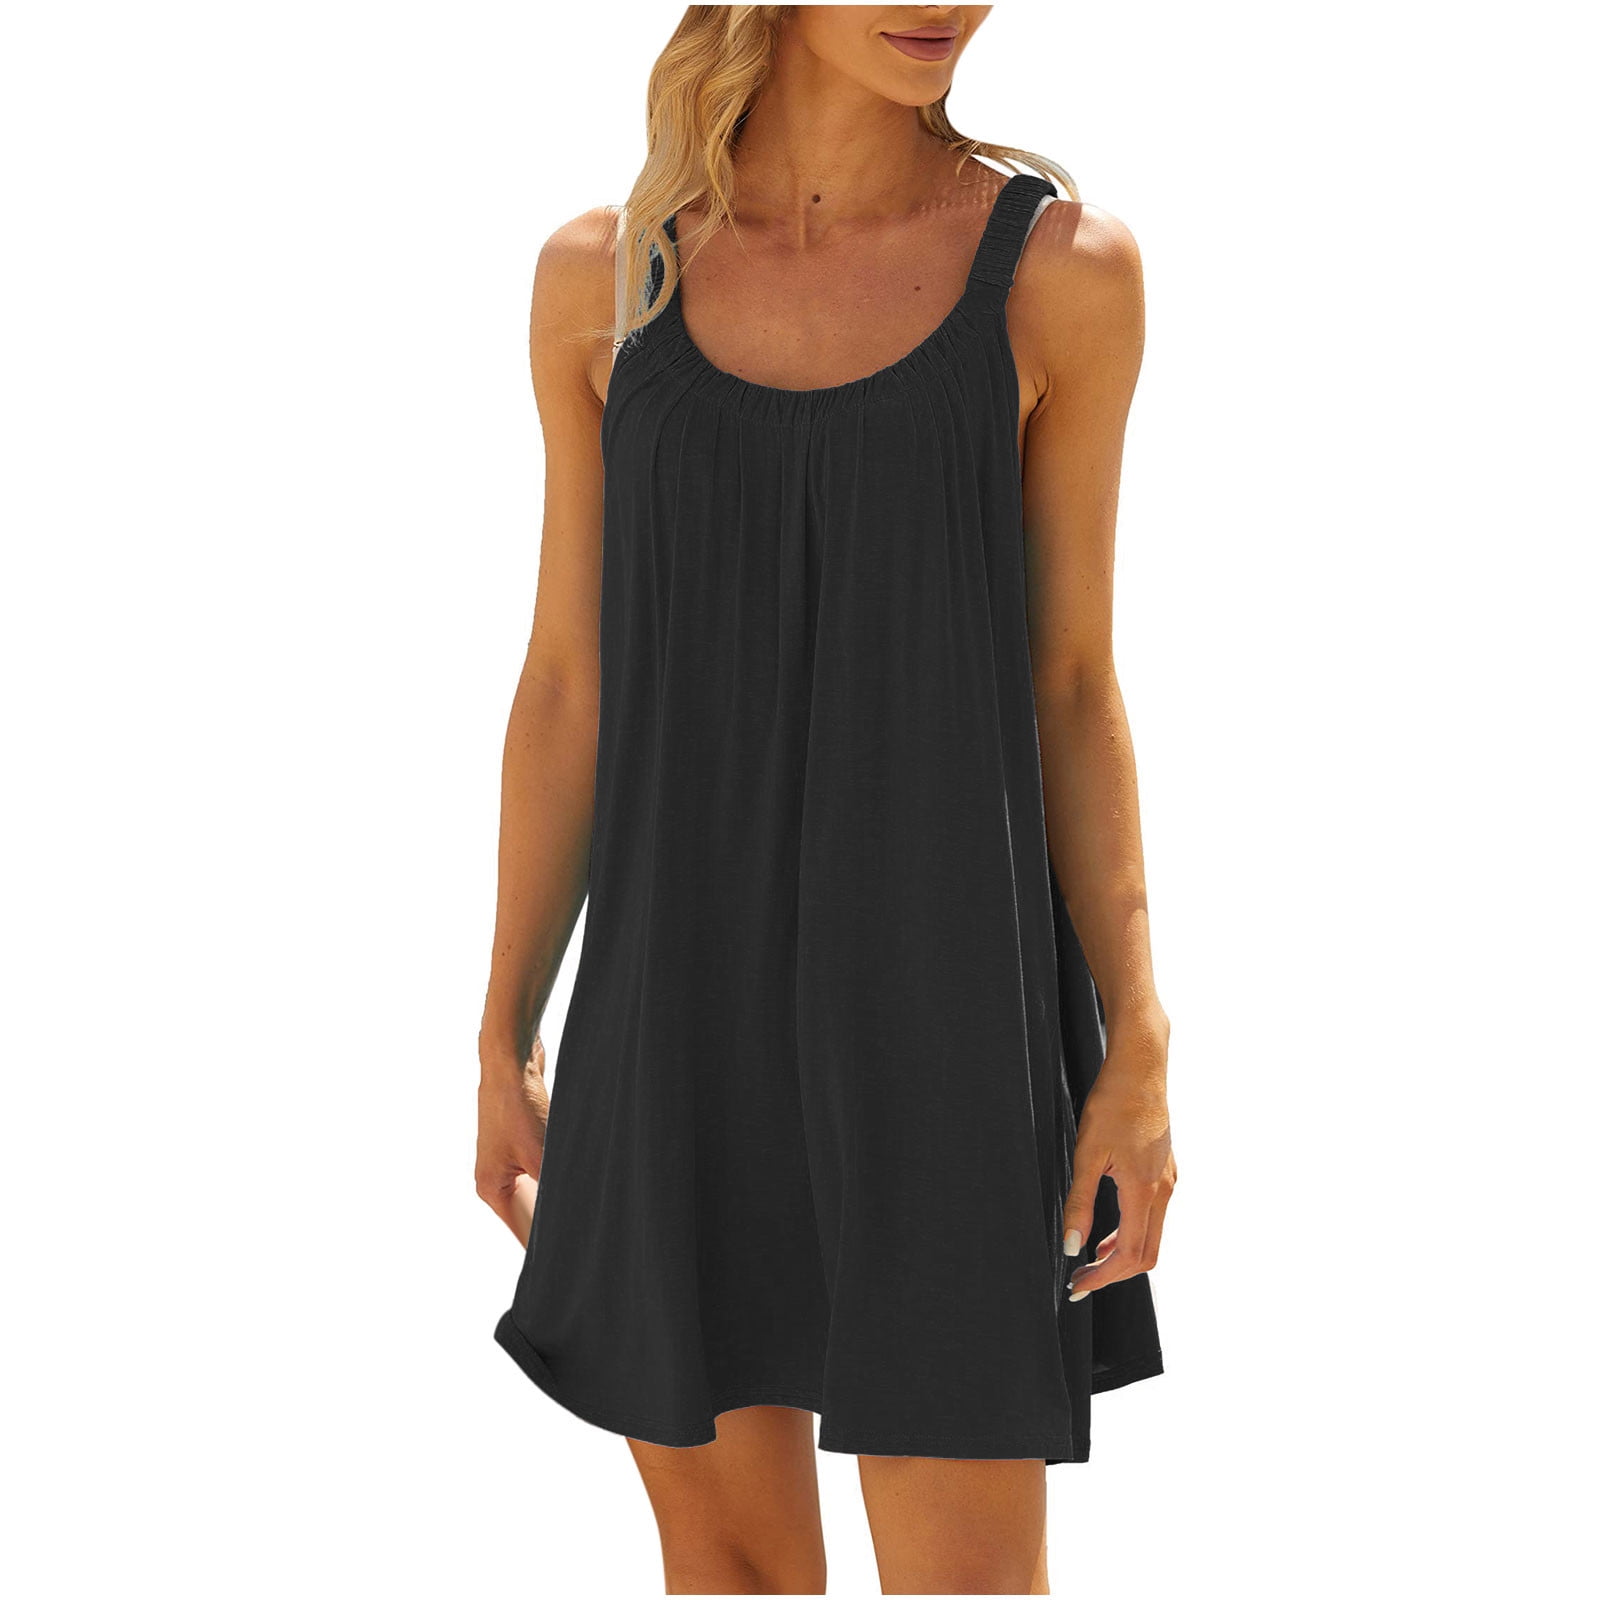 YFNNUP My Orders Placed My Account Women Sleeveless Summer Dress Casual ...